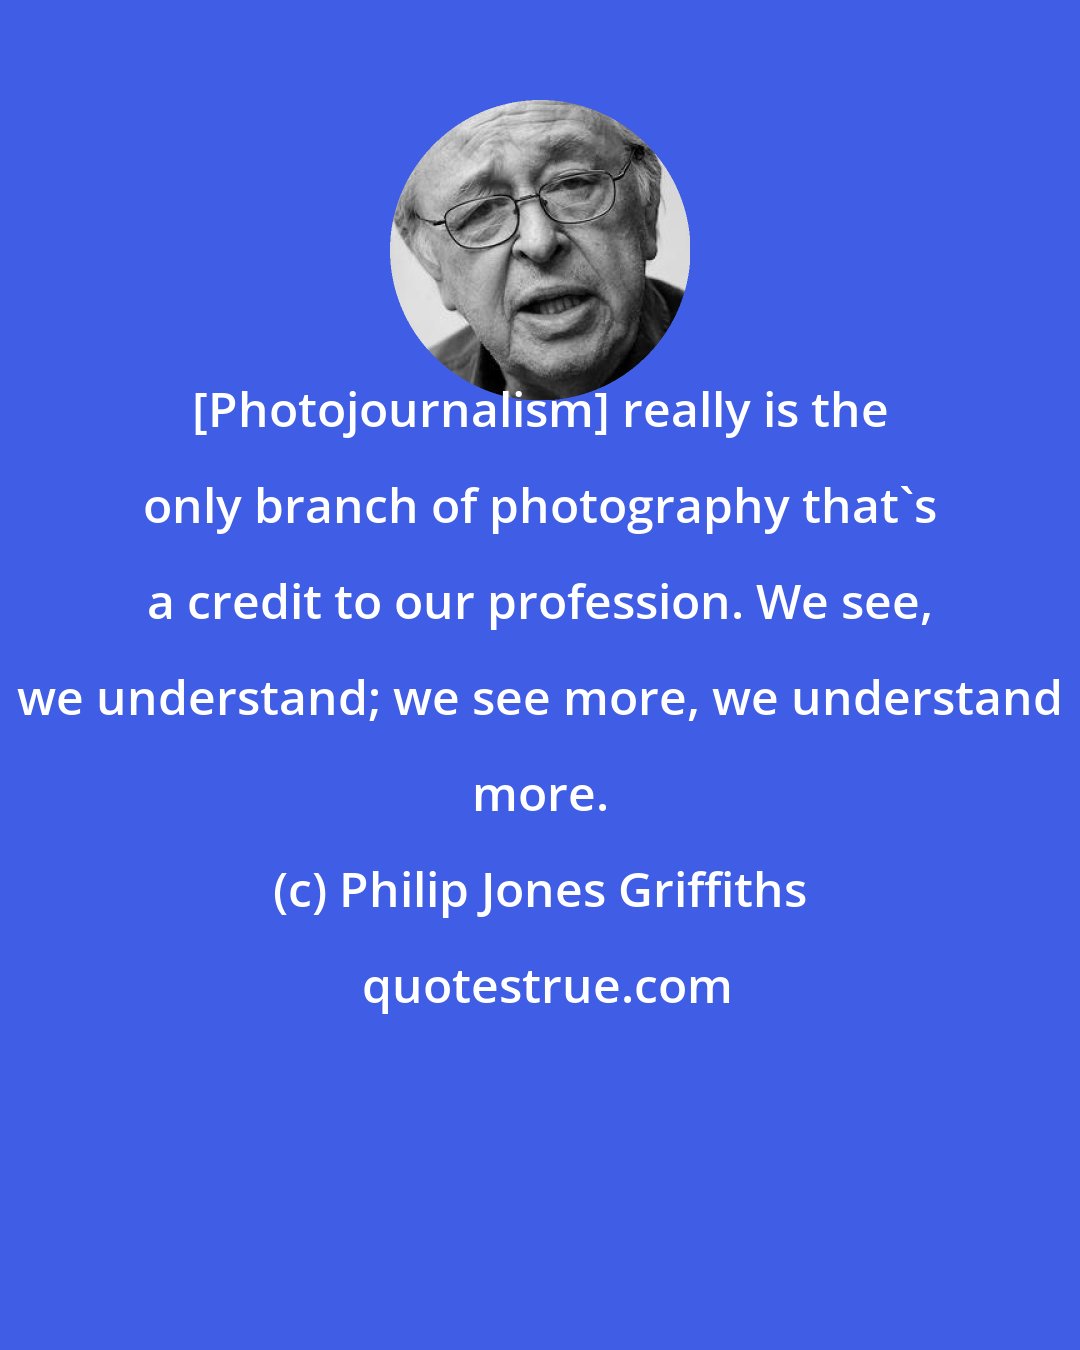 Philip Jones Griffiths: [Photojournalism] really is the only branch of photography that's a credit to our profession. We see, we understand; we see more, we understand more.